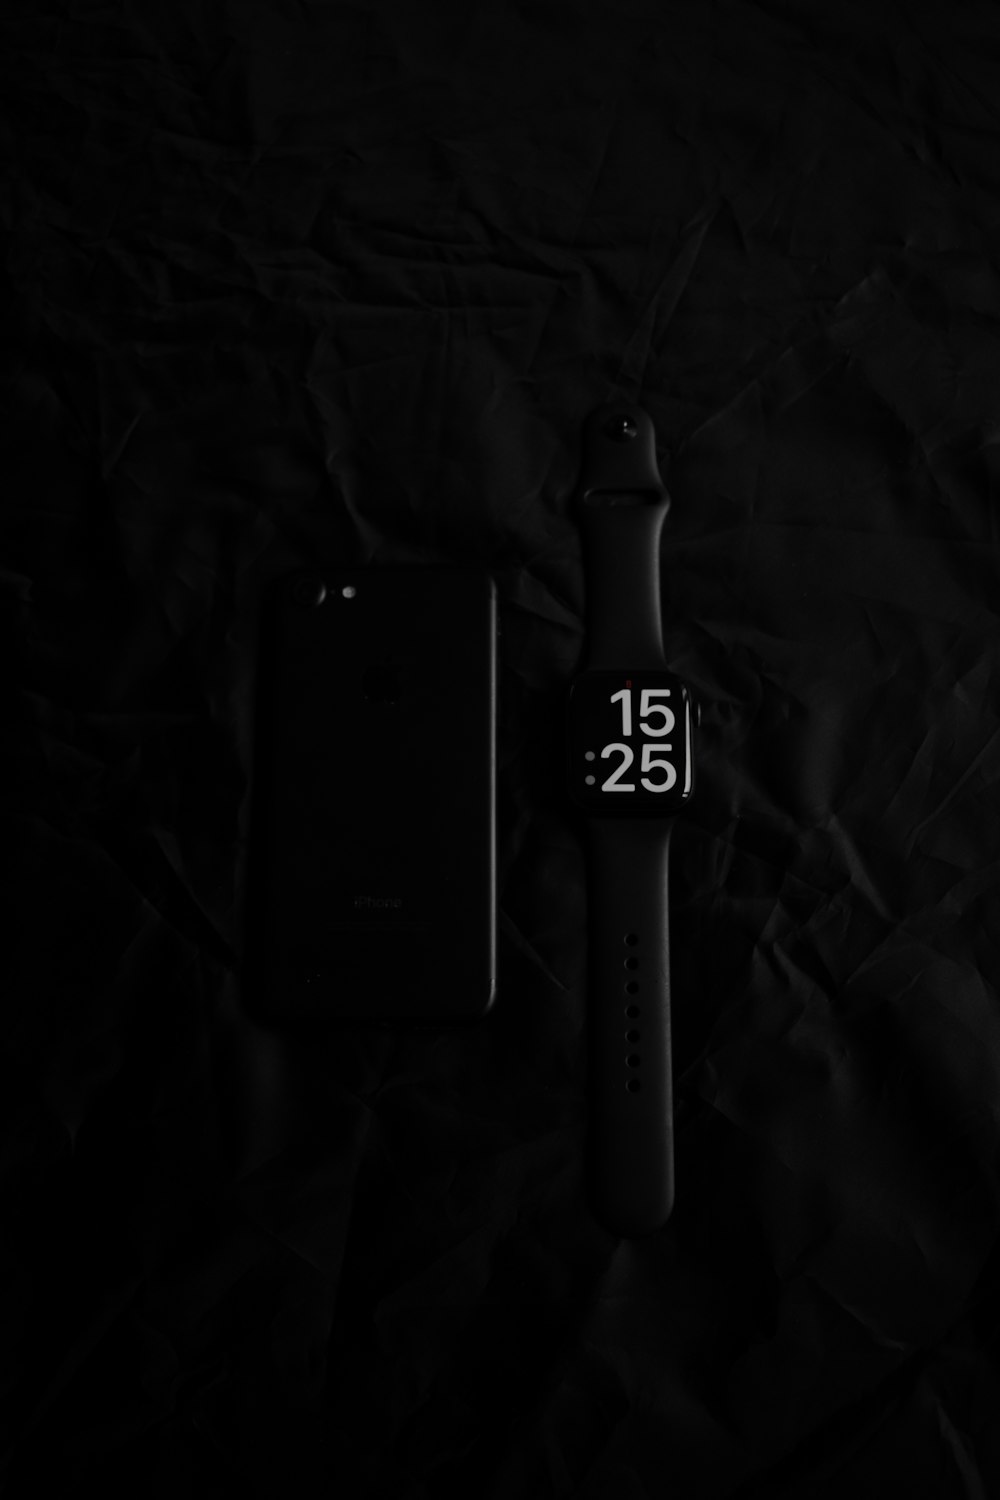 a cell phone and a watch on a black background